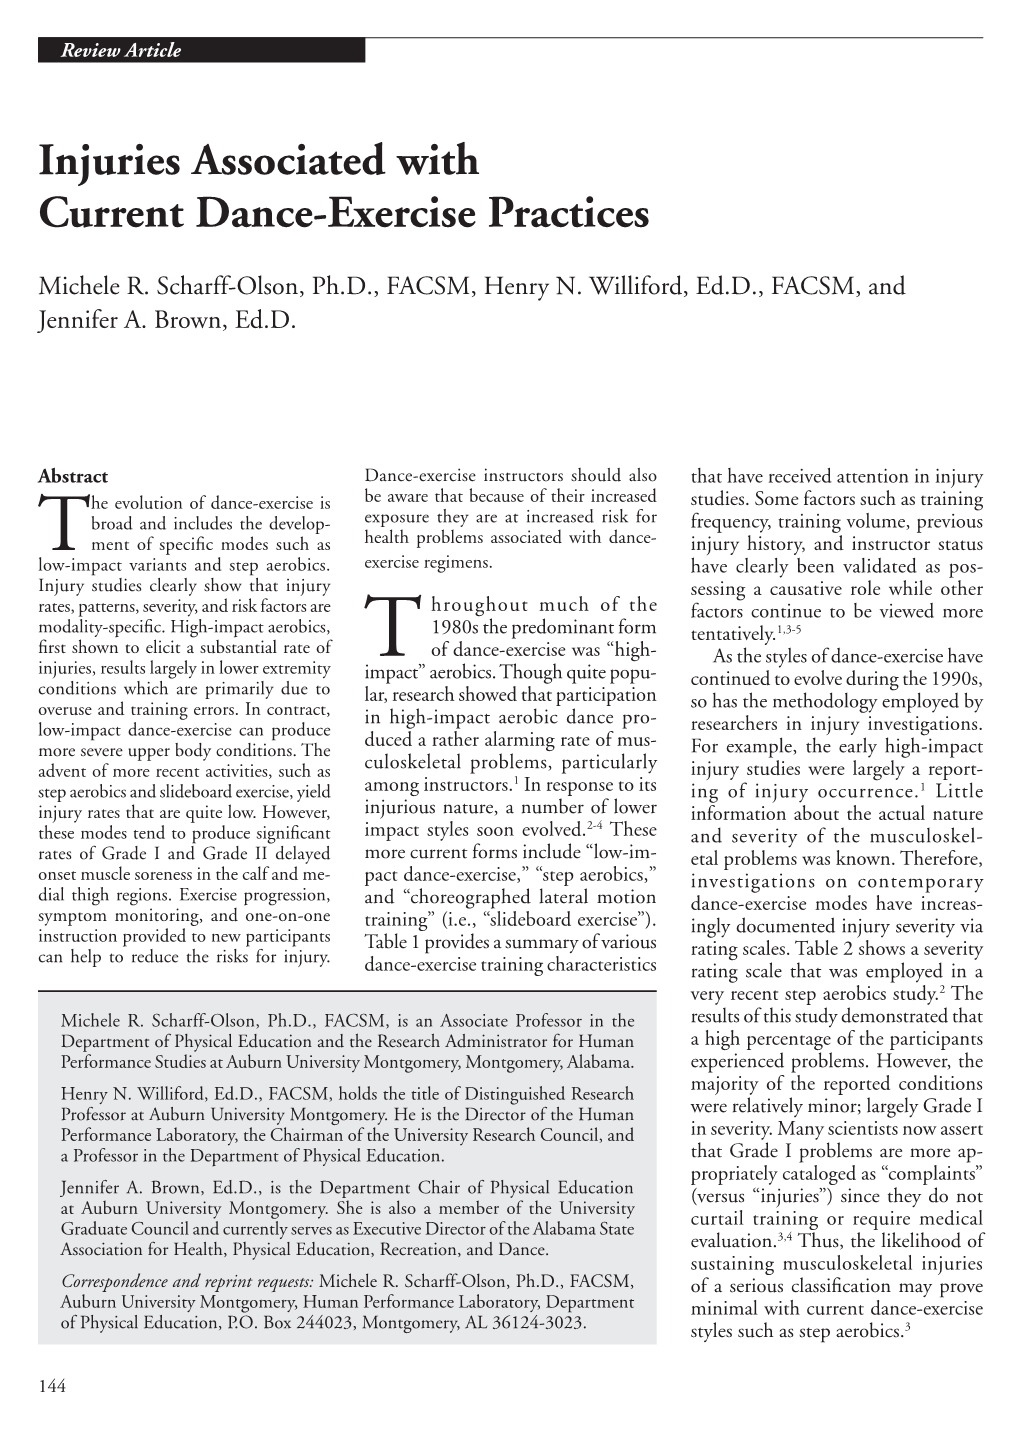 Injuries Associated with Current Dance-Exercise Practices